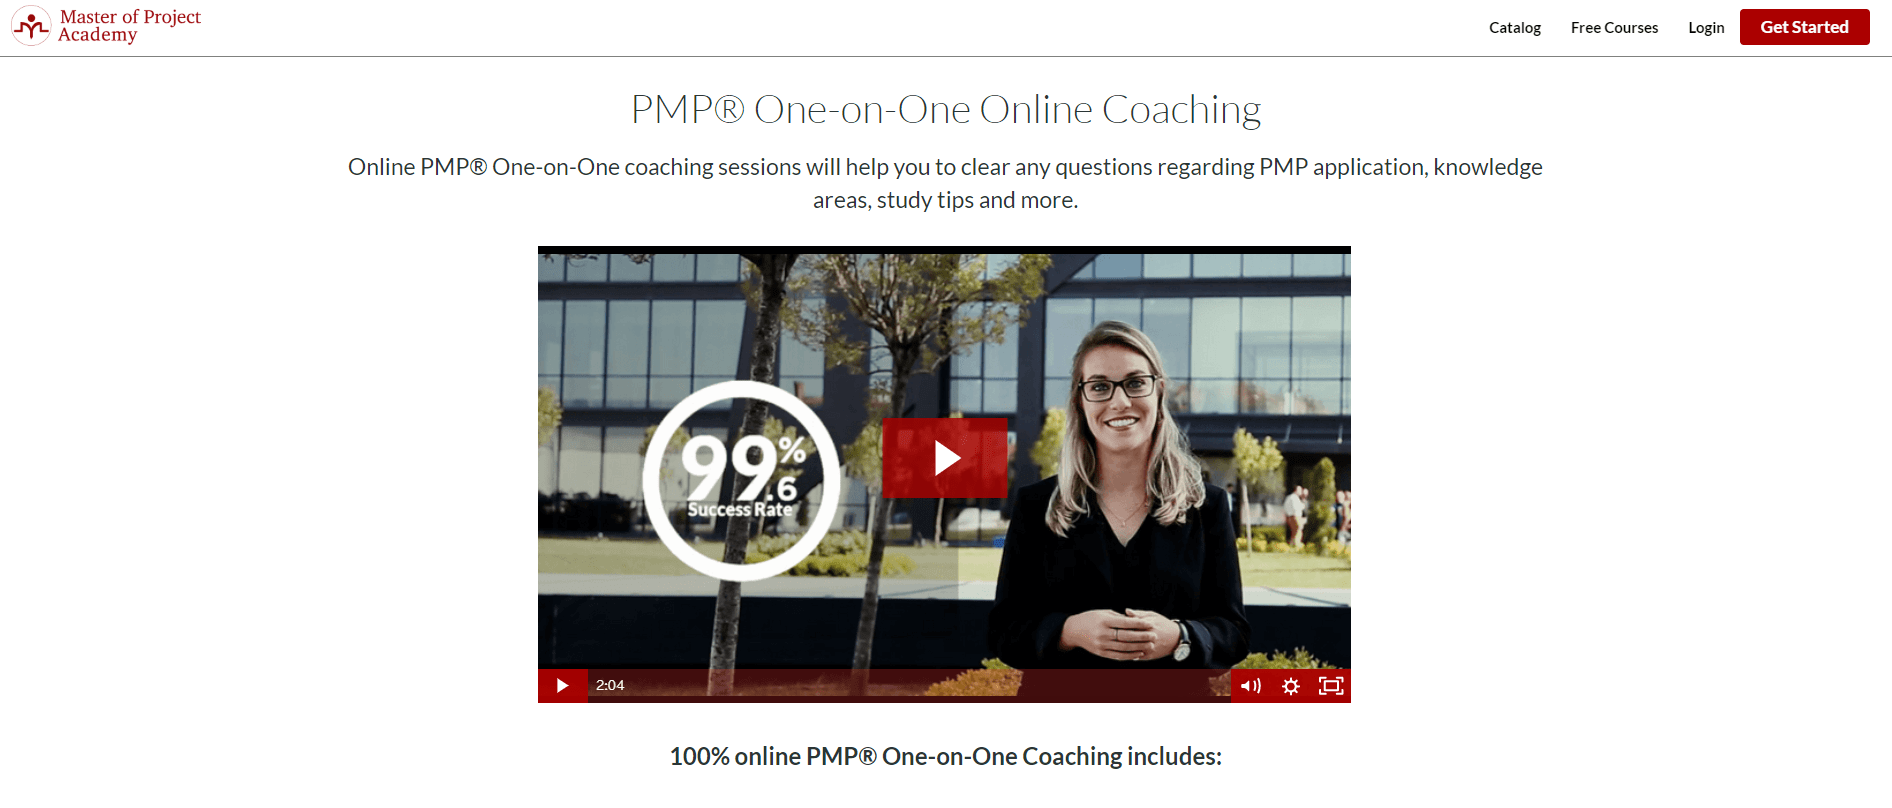 Master of Project Academy Coupon Codes- PMP® One on One Coaching 